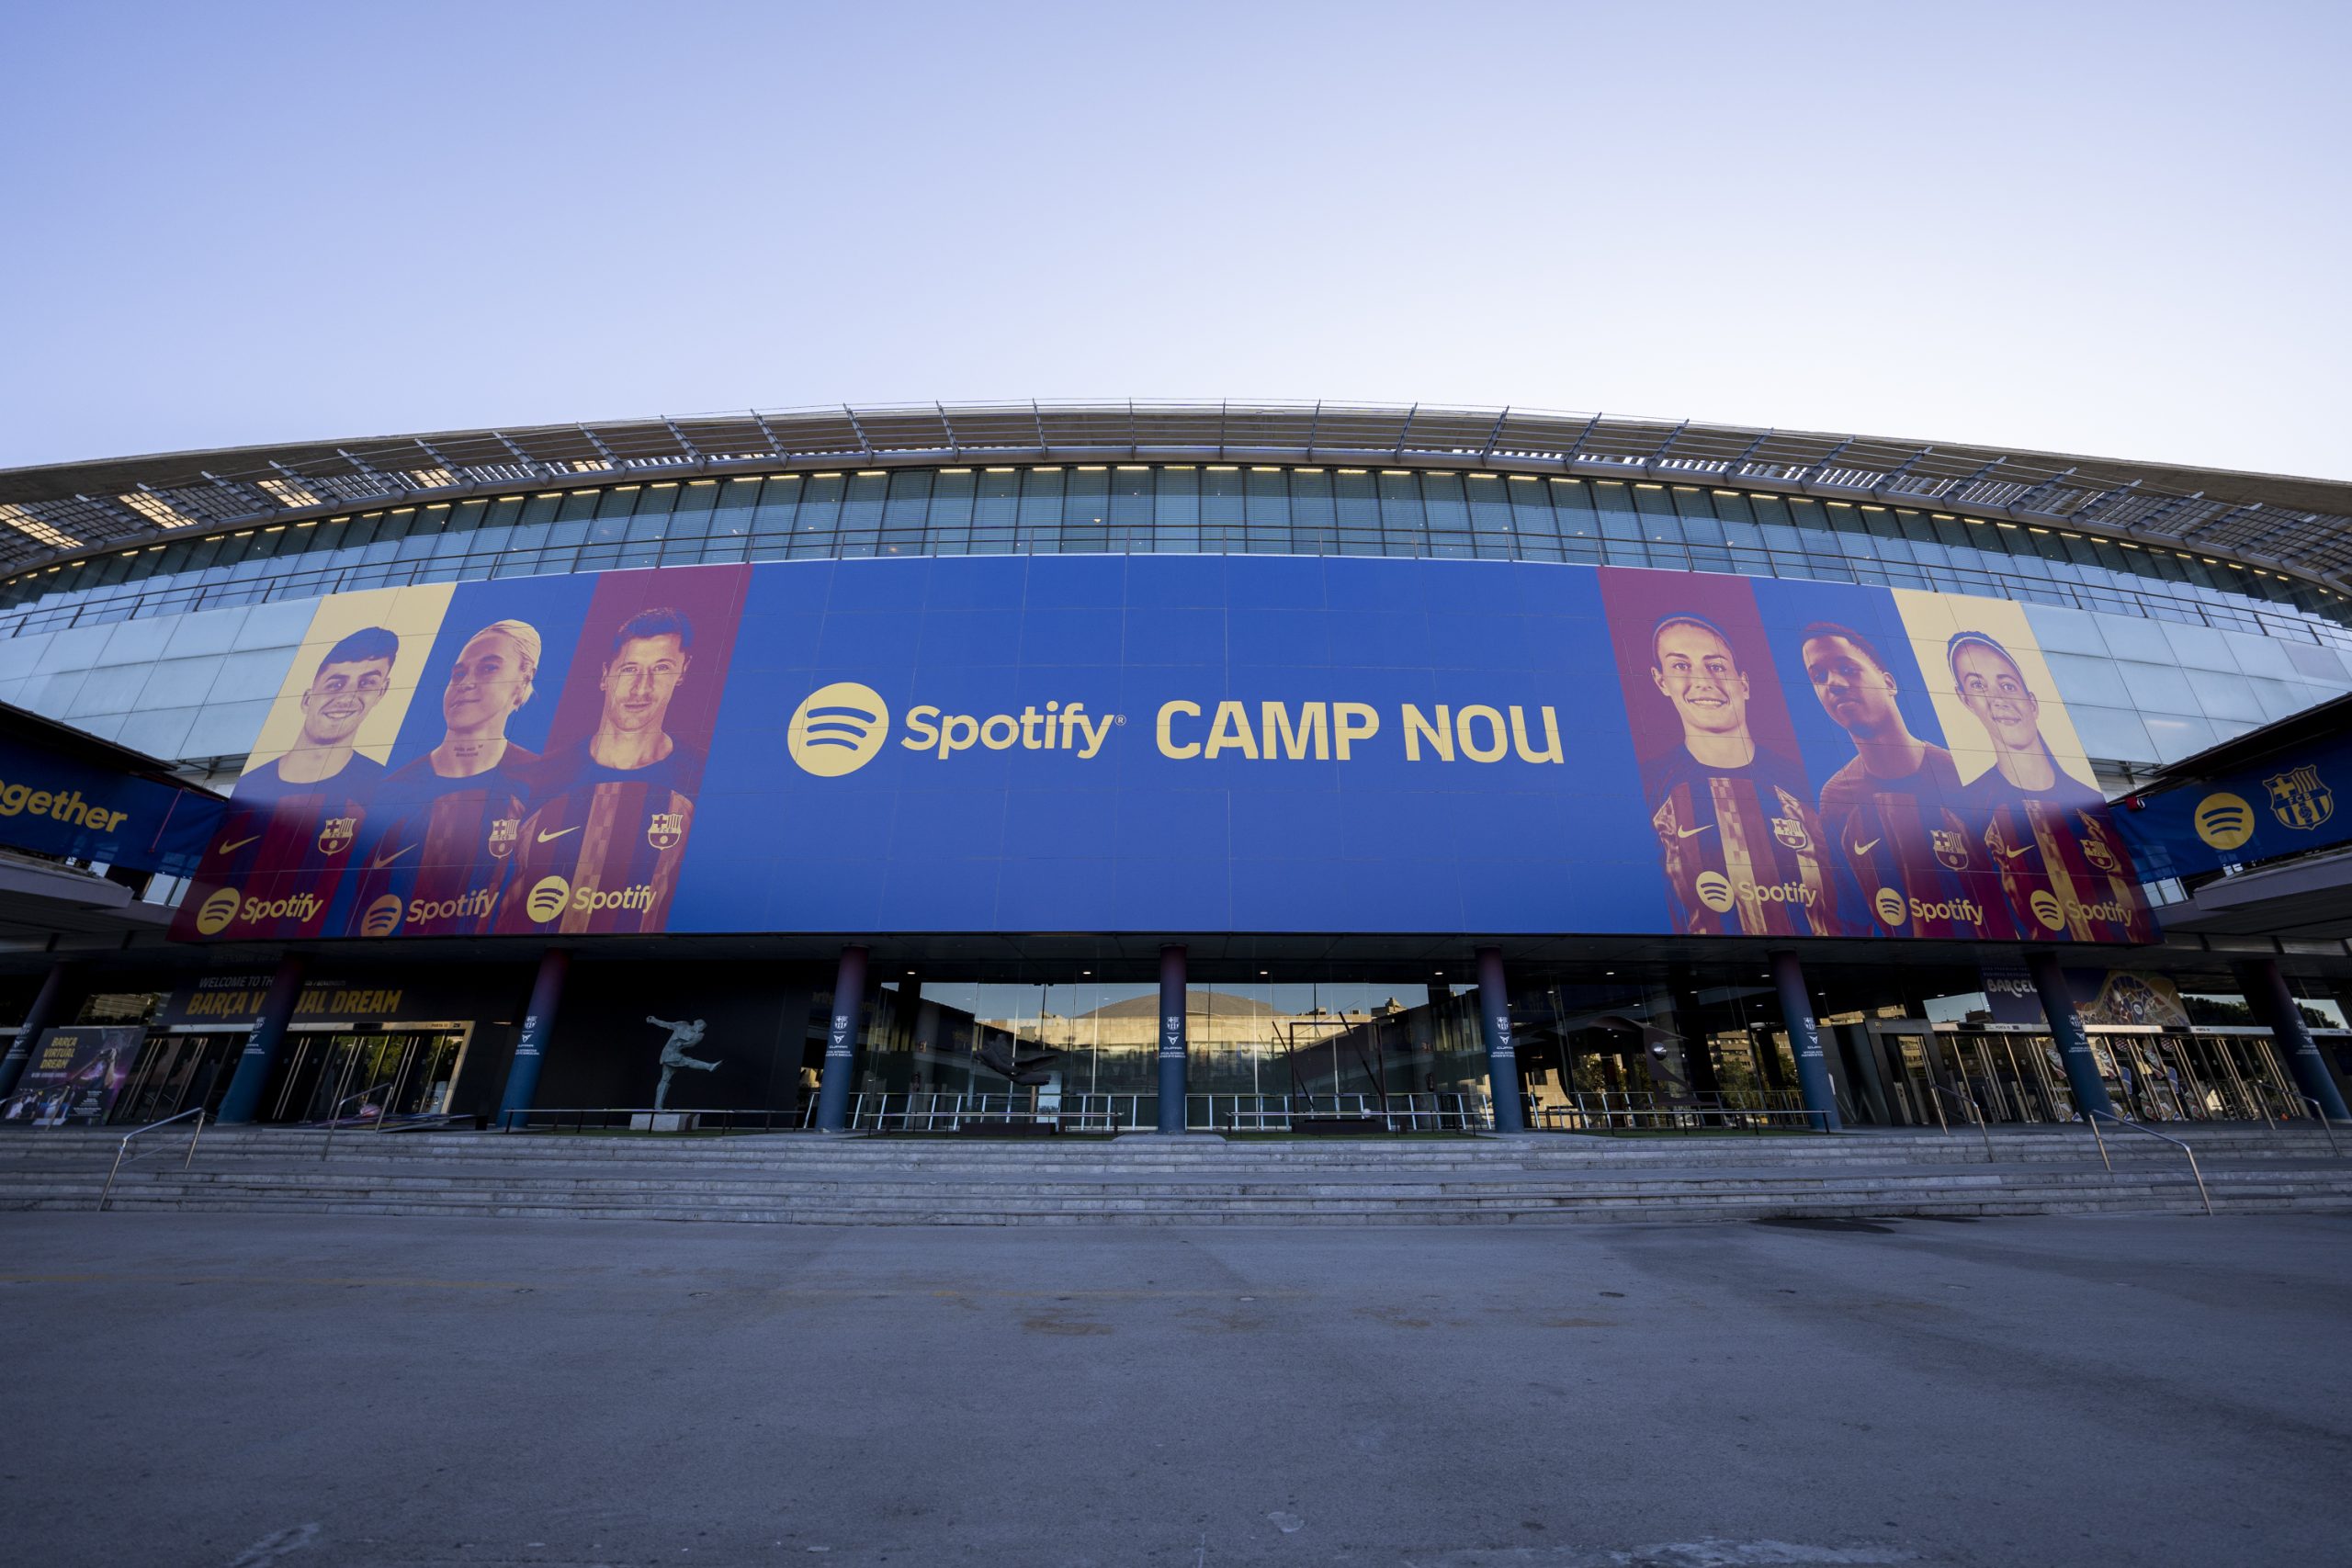 Examen album ebbe tidevand sjækel Spotify and FC Barcelona Announce a First-of-Its-Kind Partnership To Bring  Music and Football Together — Spotify